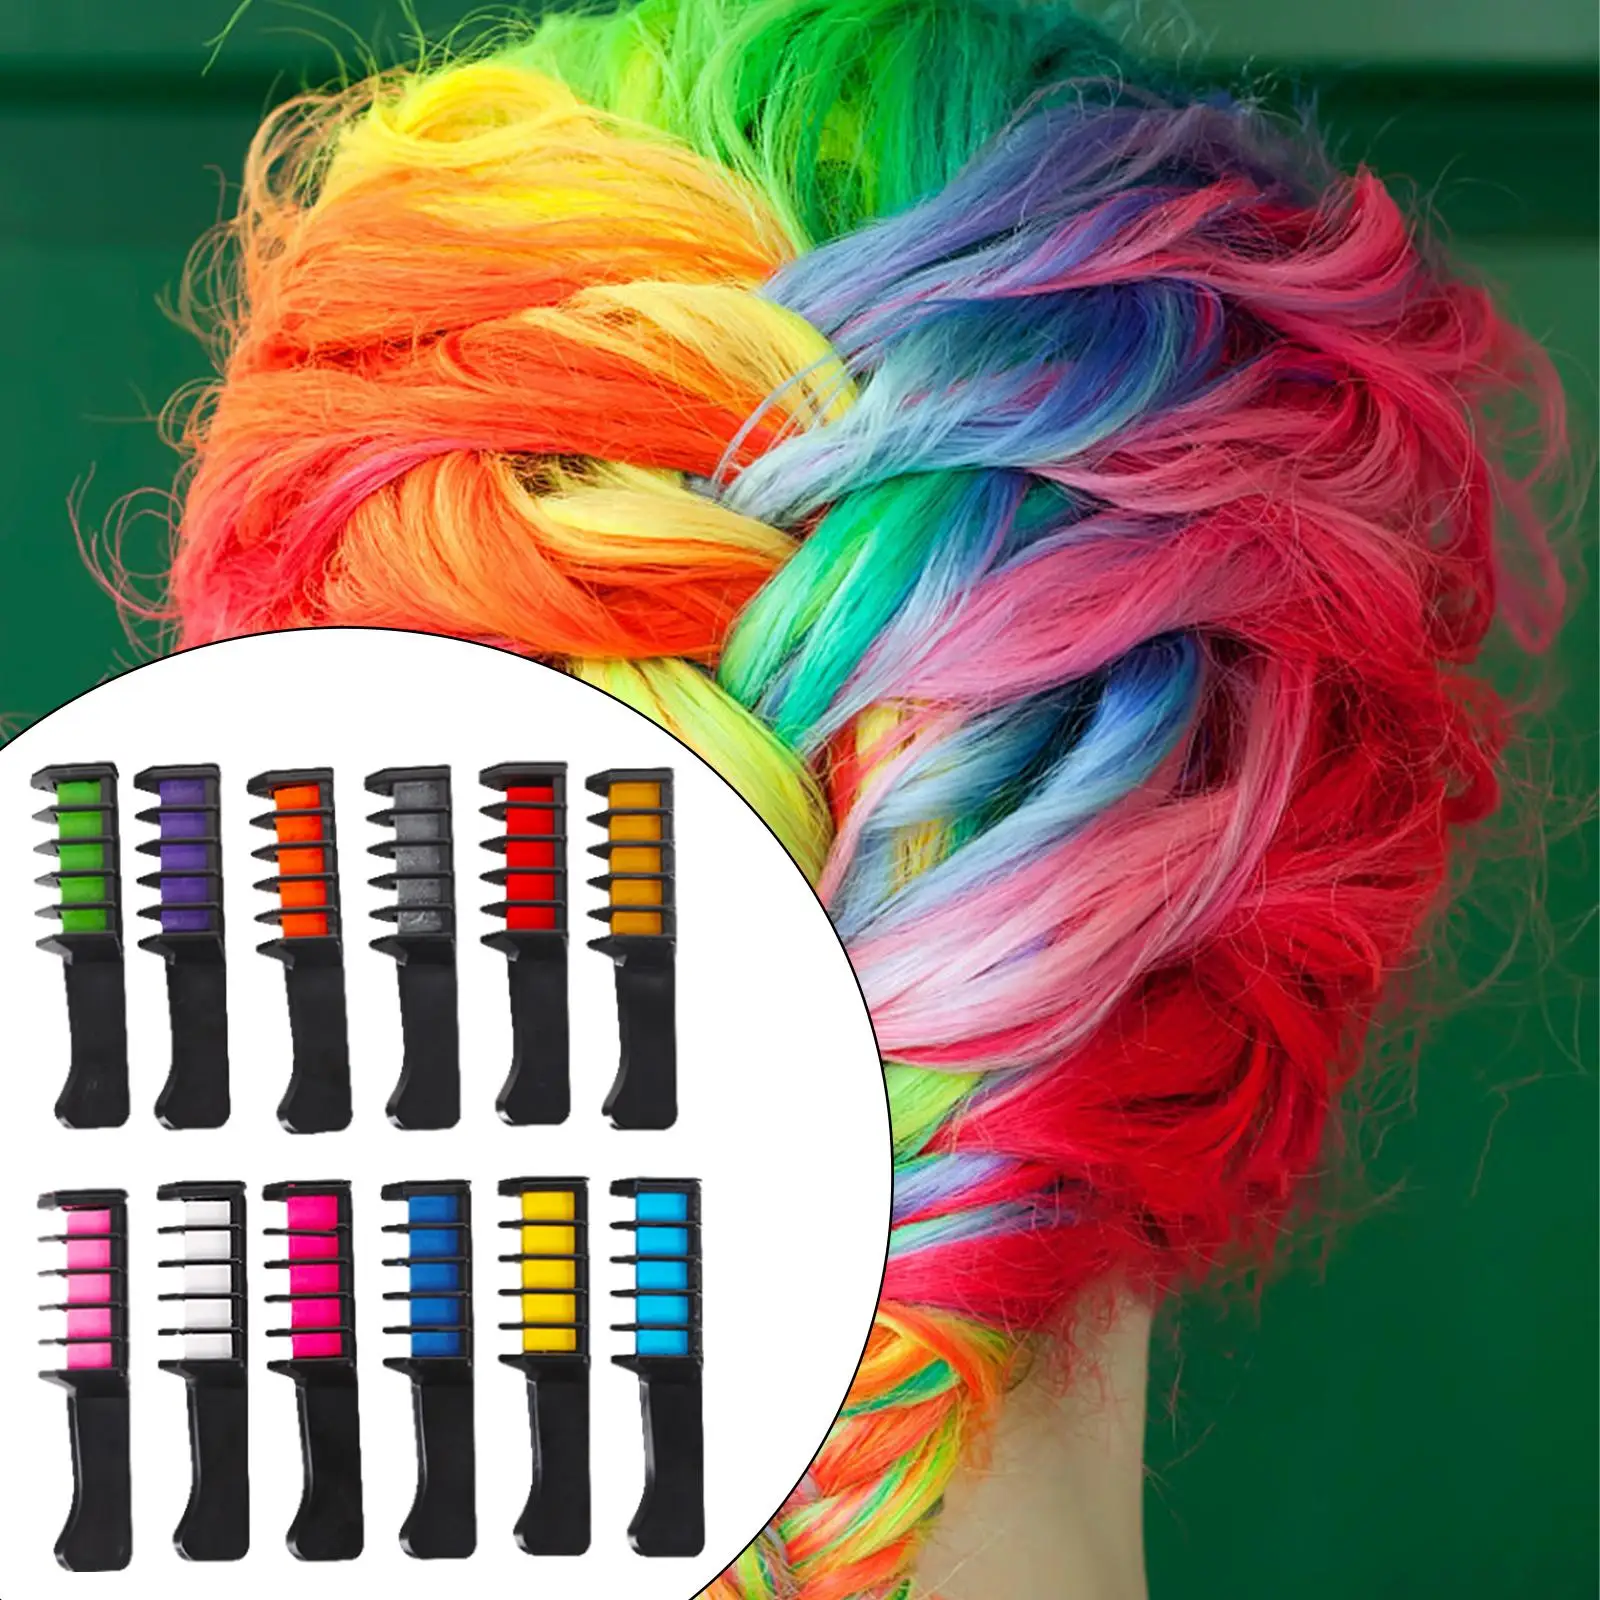 12x Disposable Dyeing Combs Hair Dye DIY Hairdressing Styling Tool Hair Color Comb for Birthday Party Festivals Party Halloween